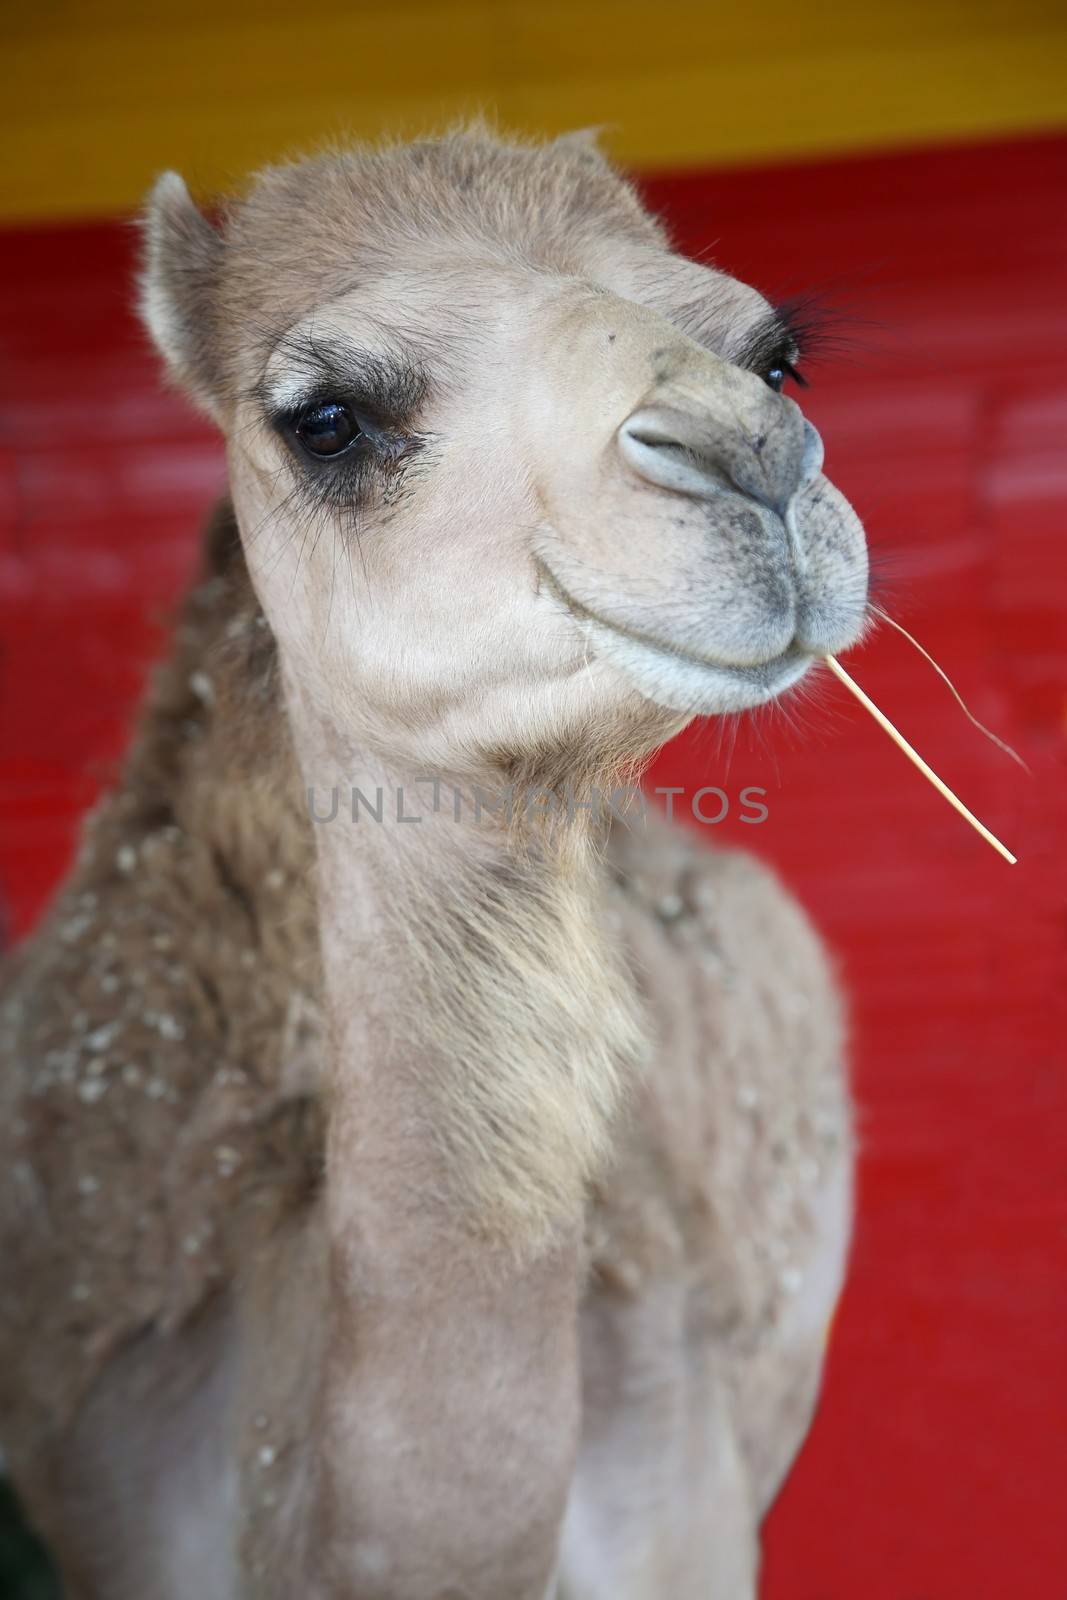 Camel with a stalk of grass in it's mouth and a smiling look